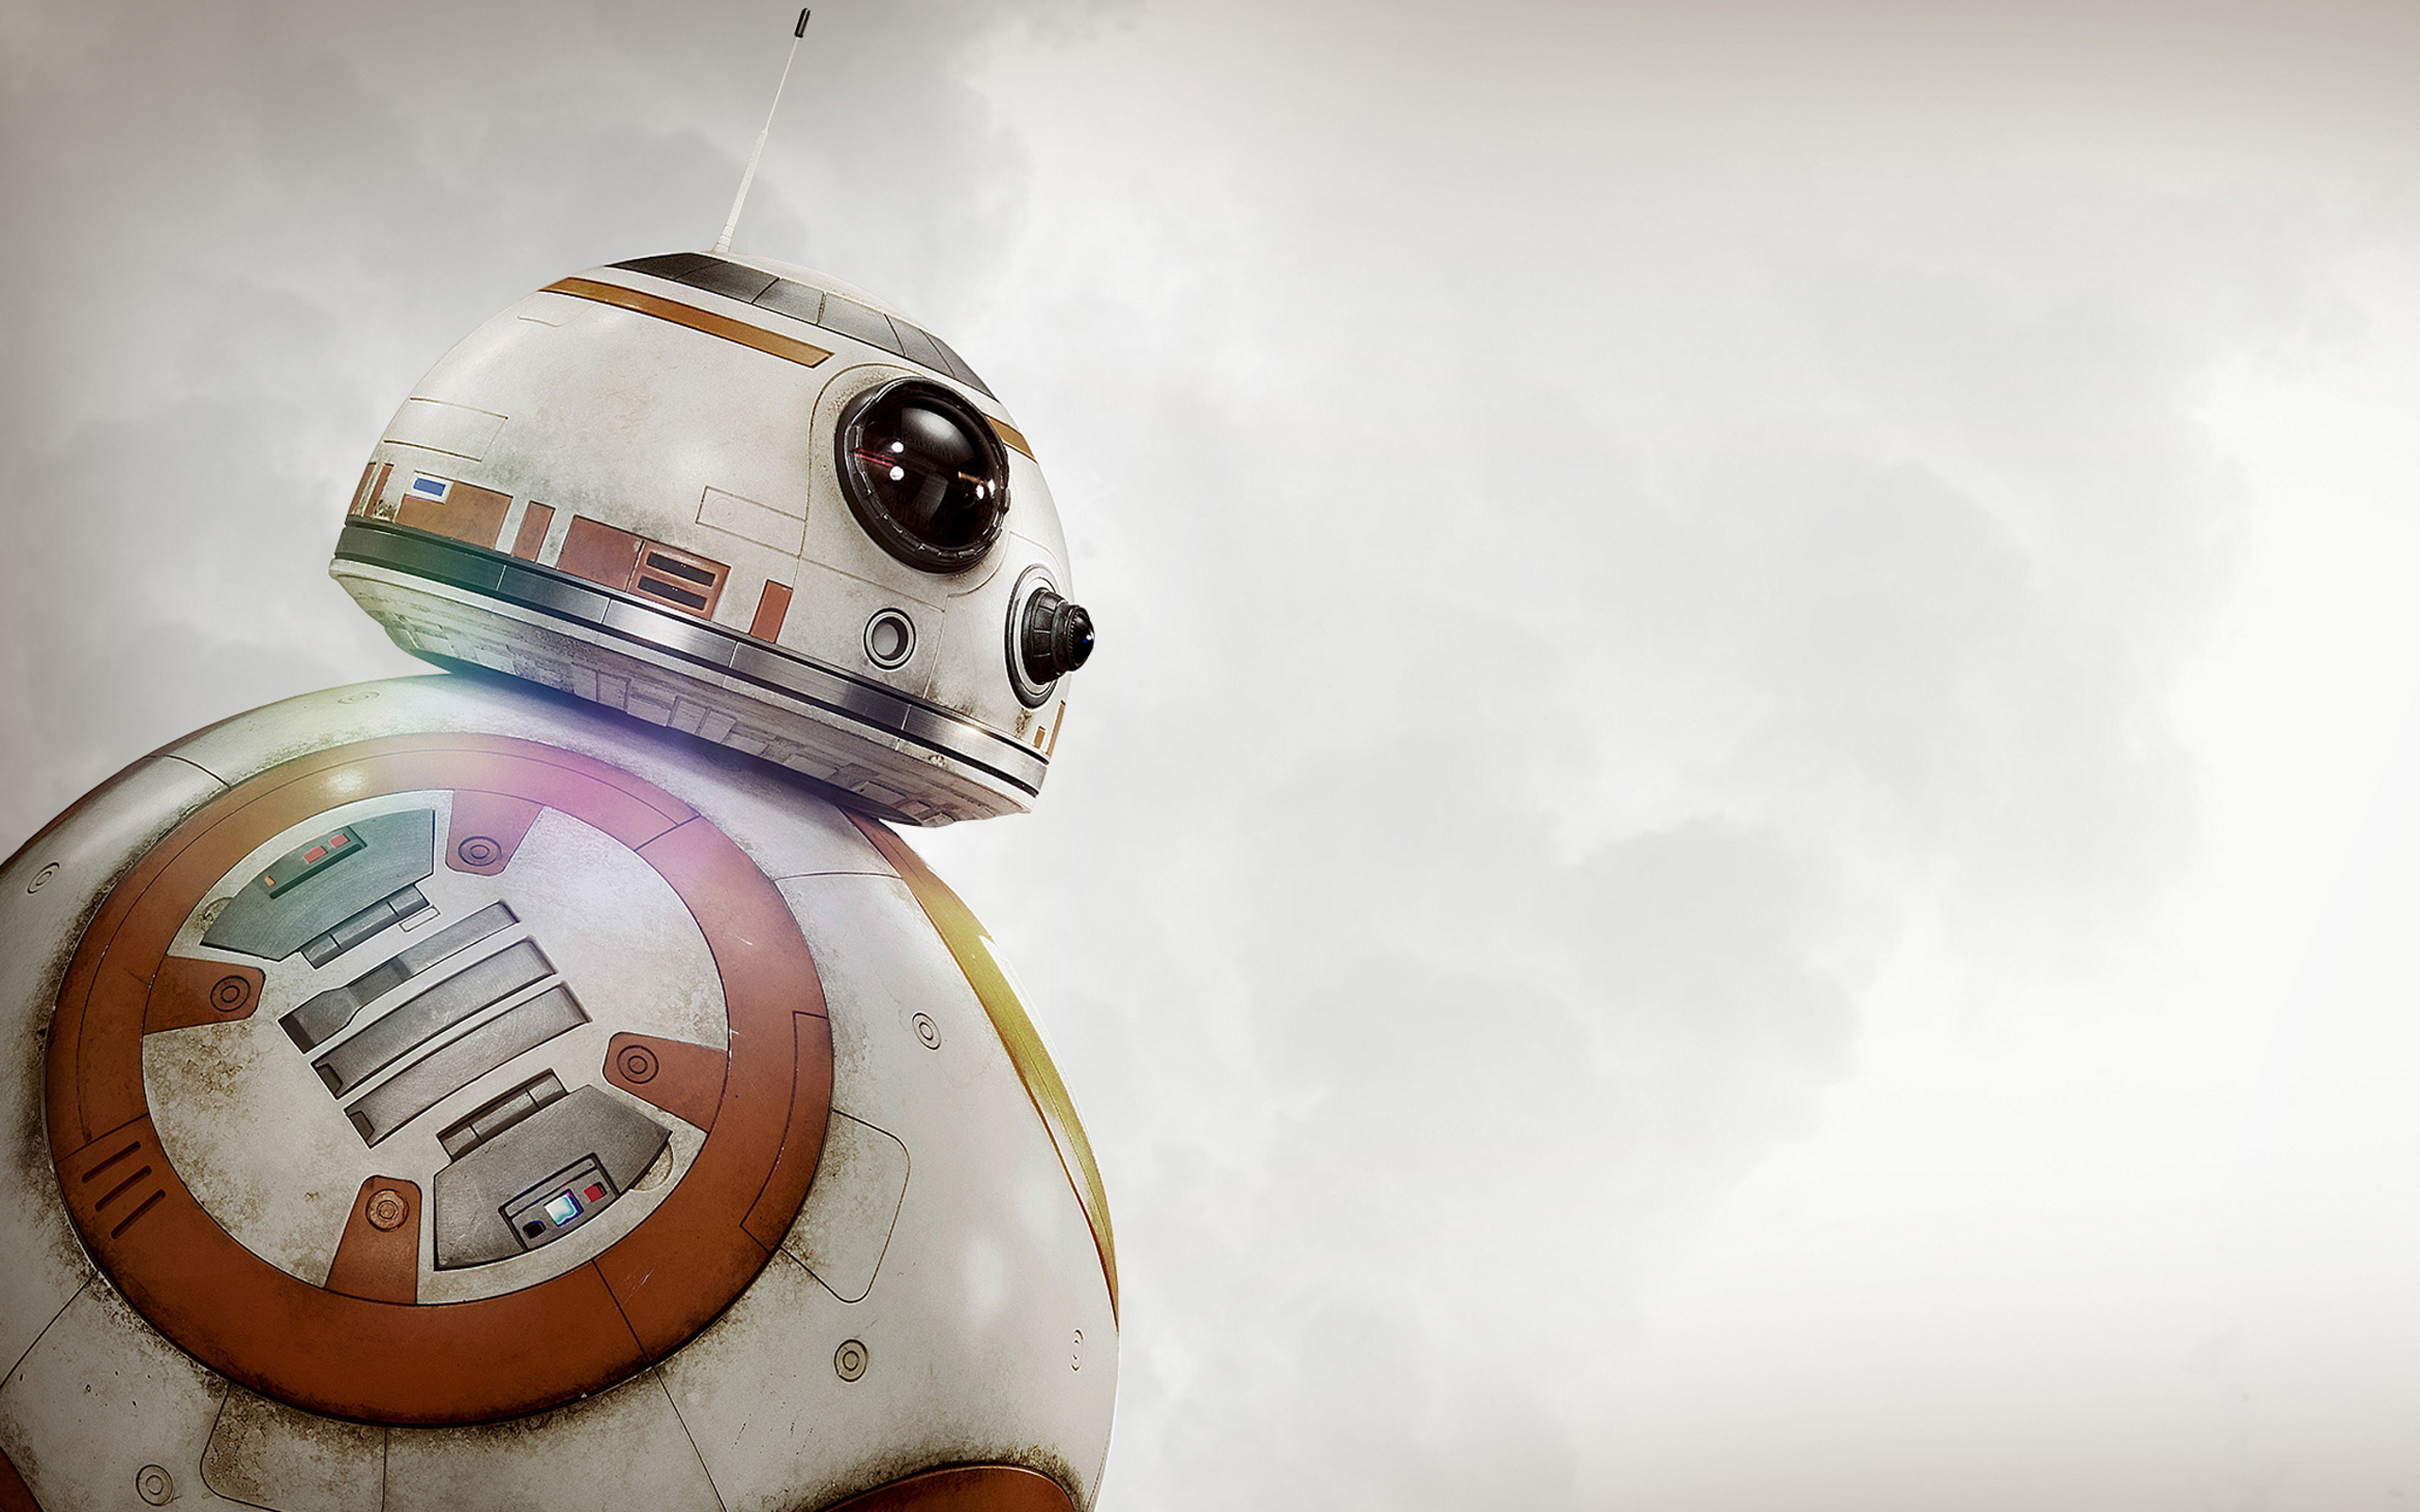 bb8 wallpaper,helmet,personal protective equipment,r2 d2,photography,fictional character